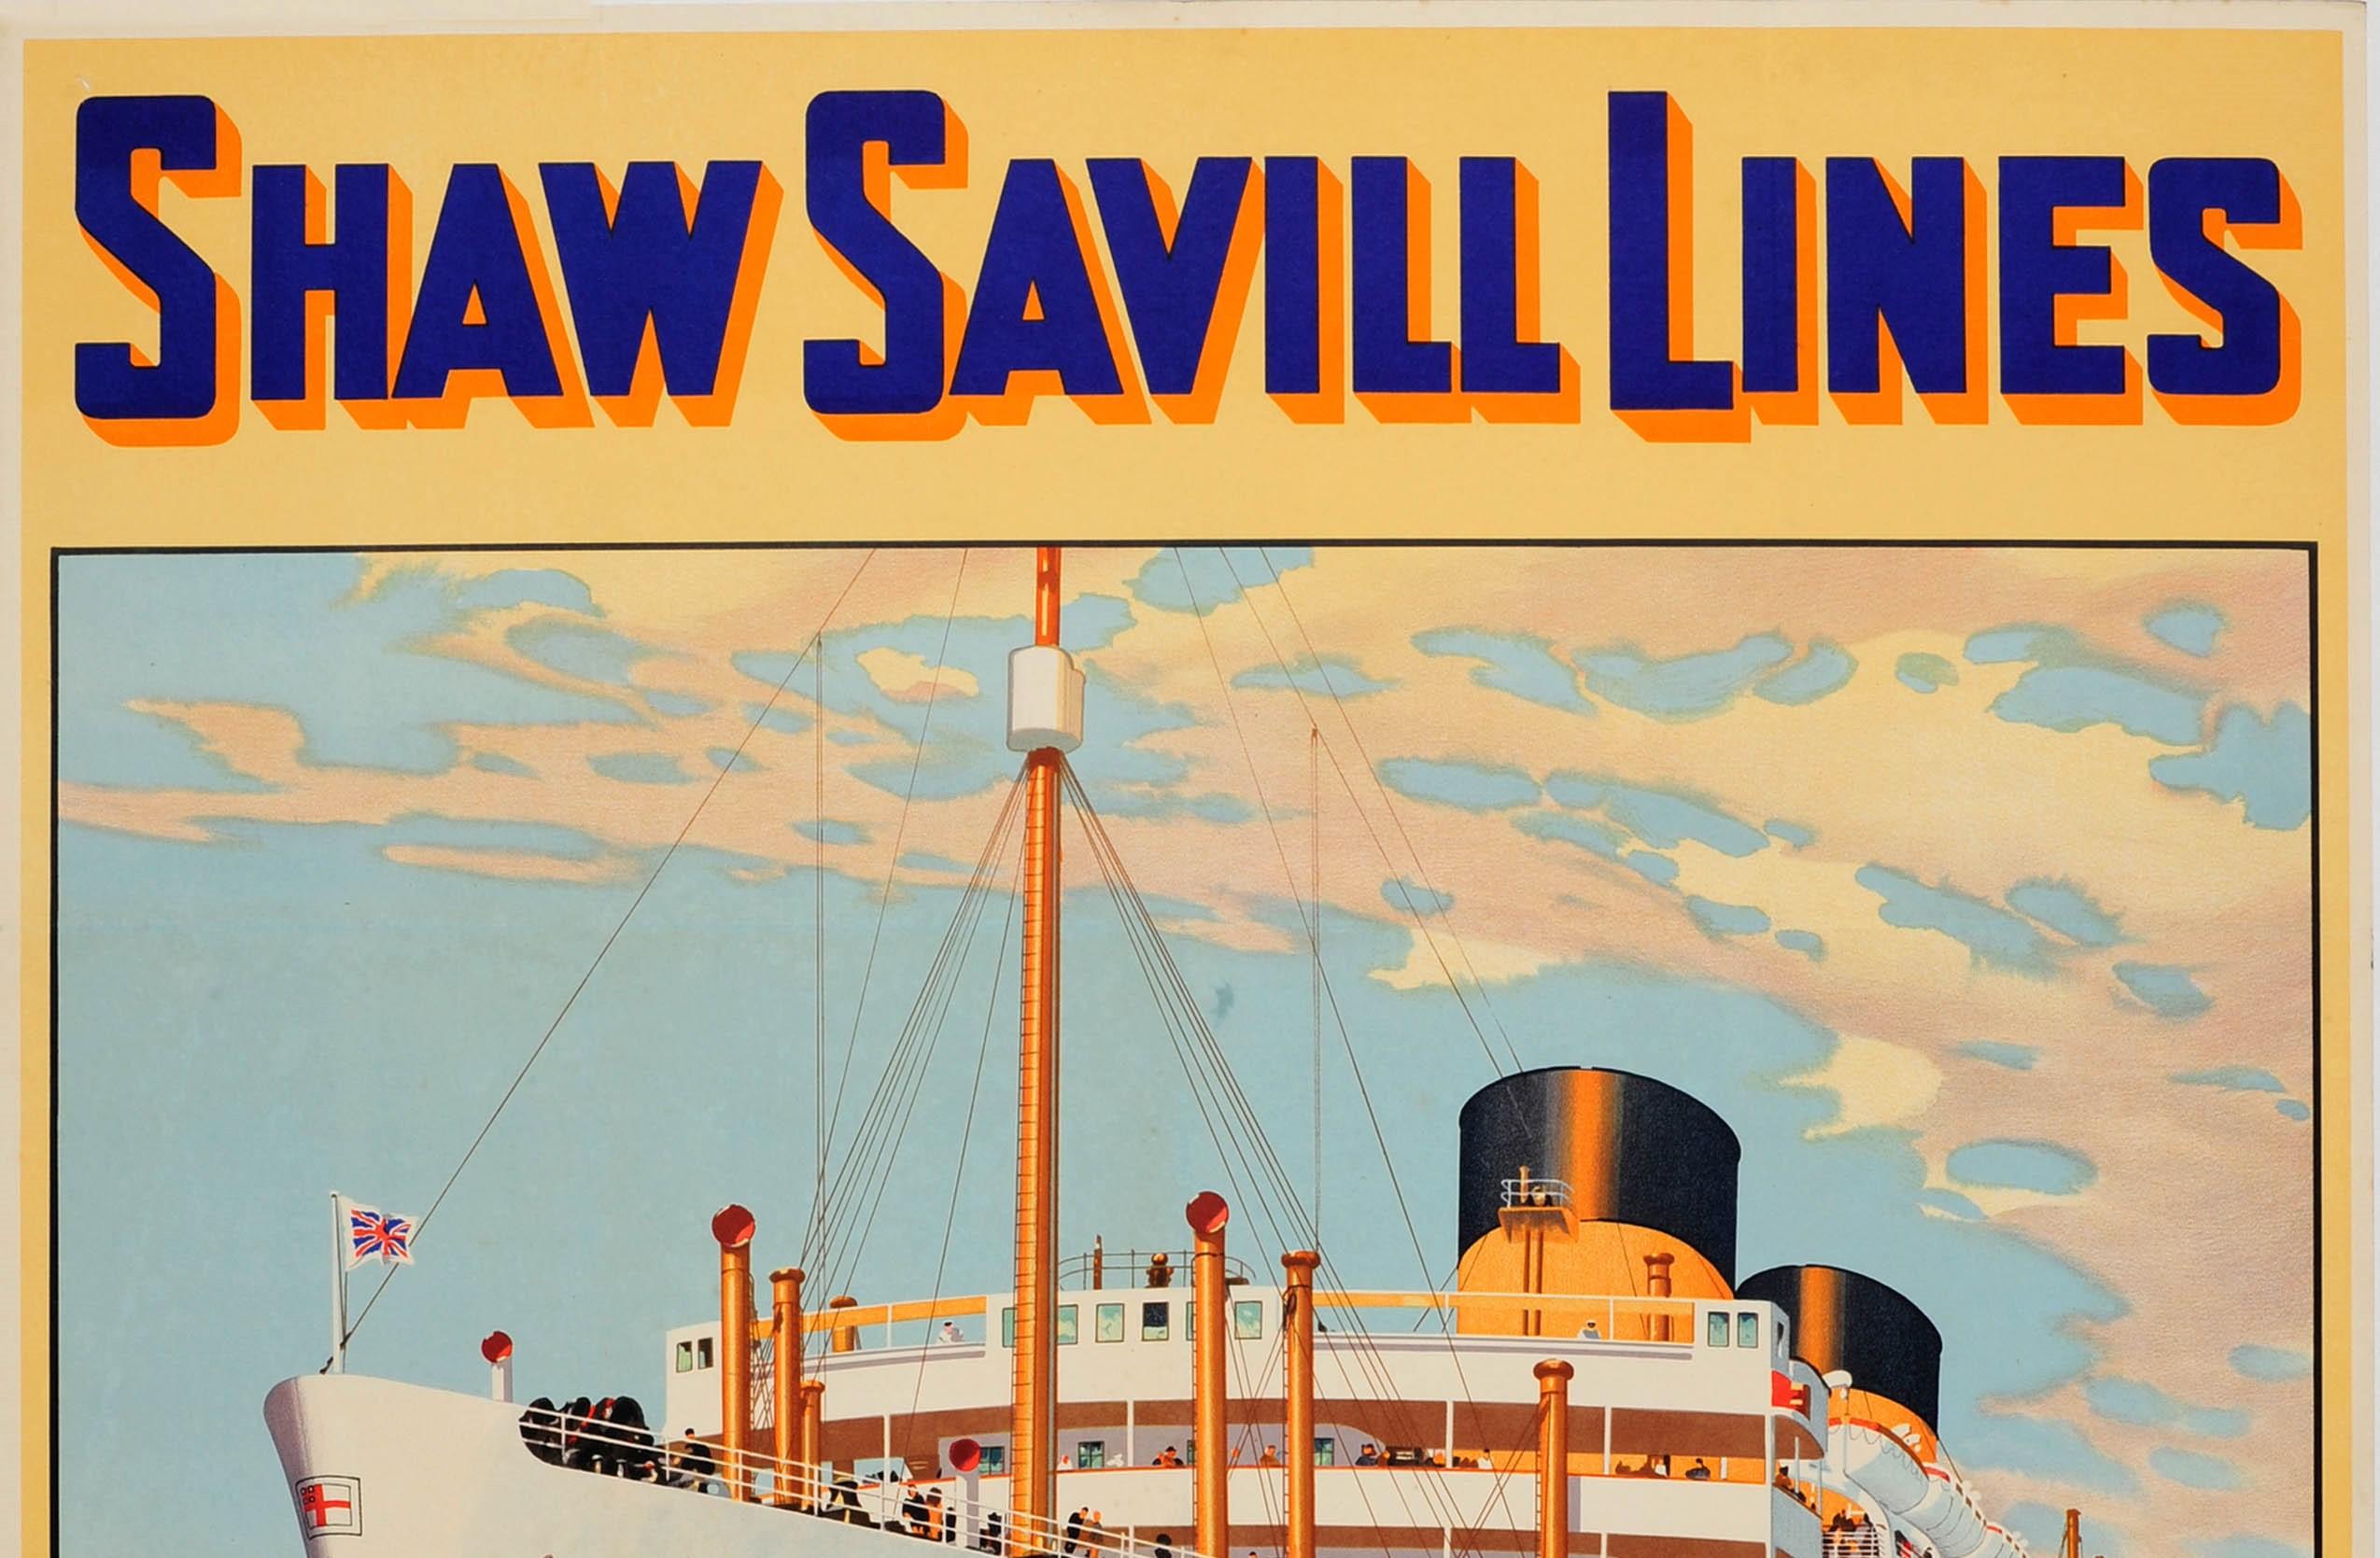 Original vintage cruise ship travel advertising poster for Shaw Savill Lines - England - South Africa - Australia - New Zealand featuring a great illustration by William McDowell (1988-1950) of the Dominion Monarch ocean liner sailing at sea in